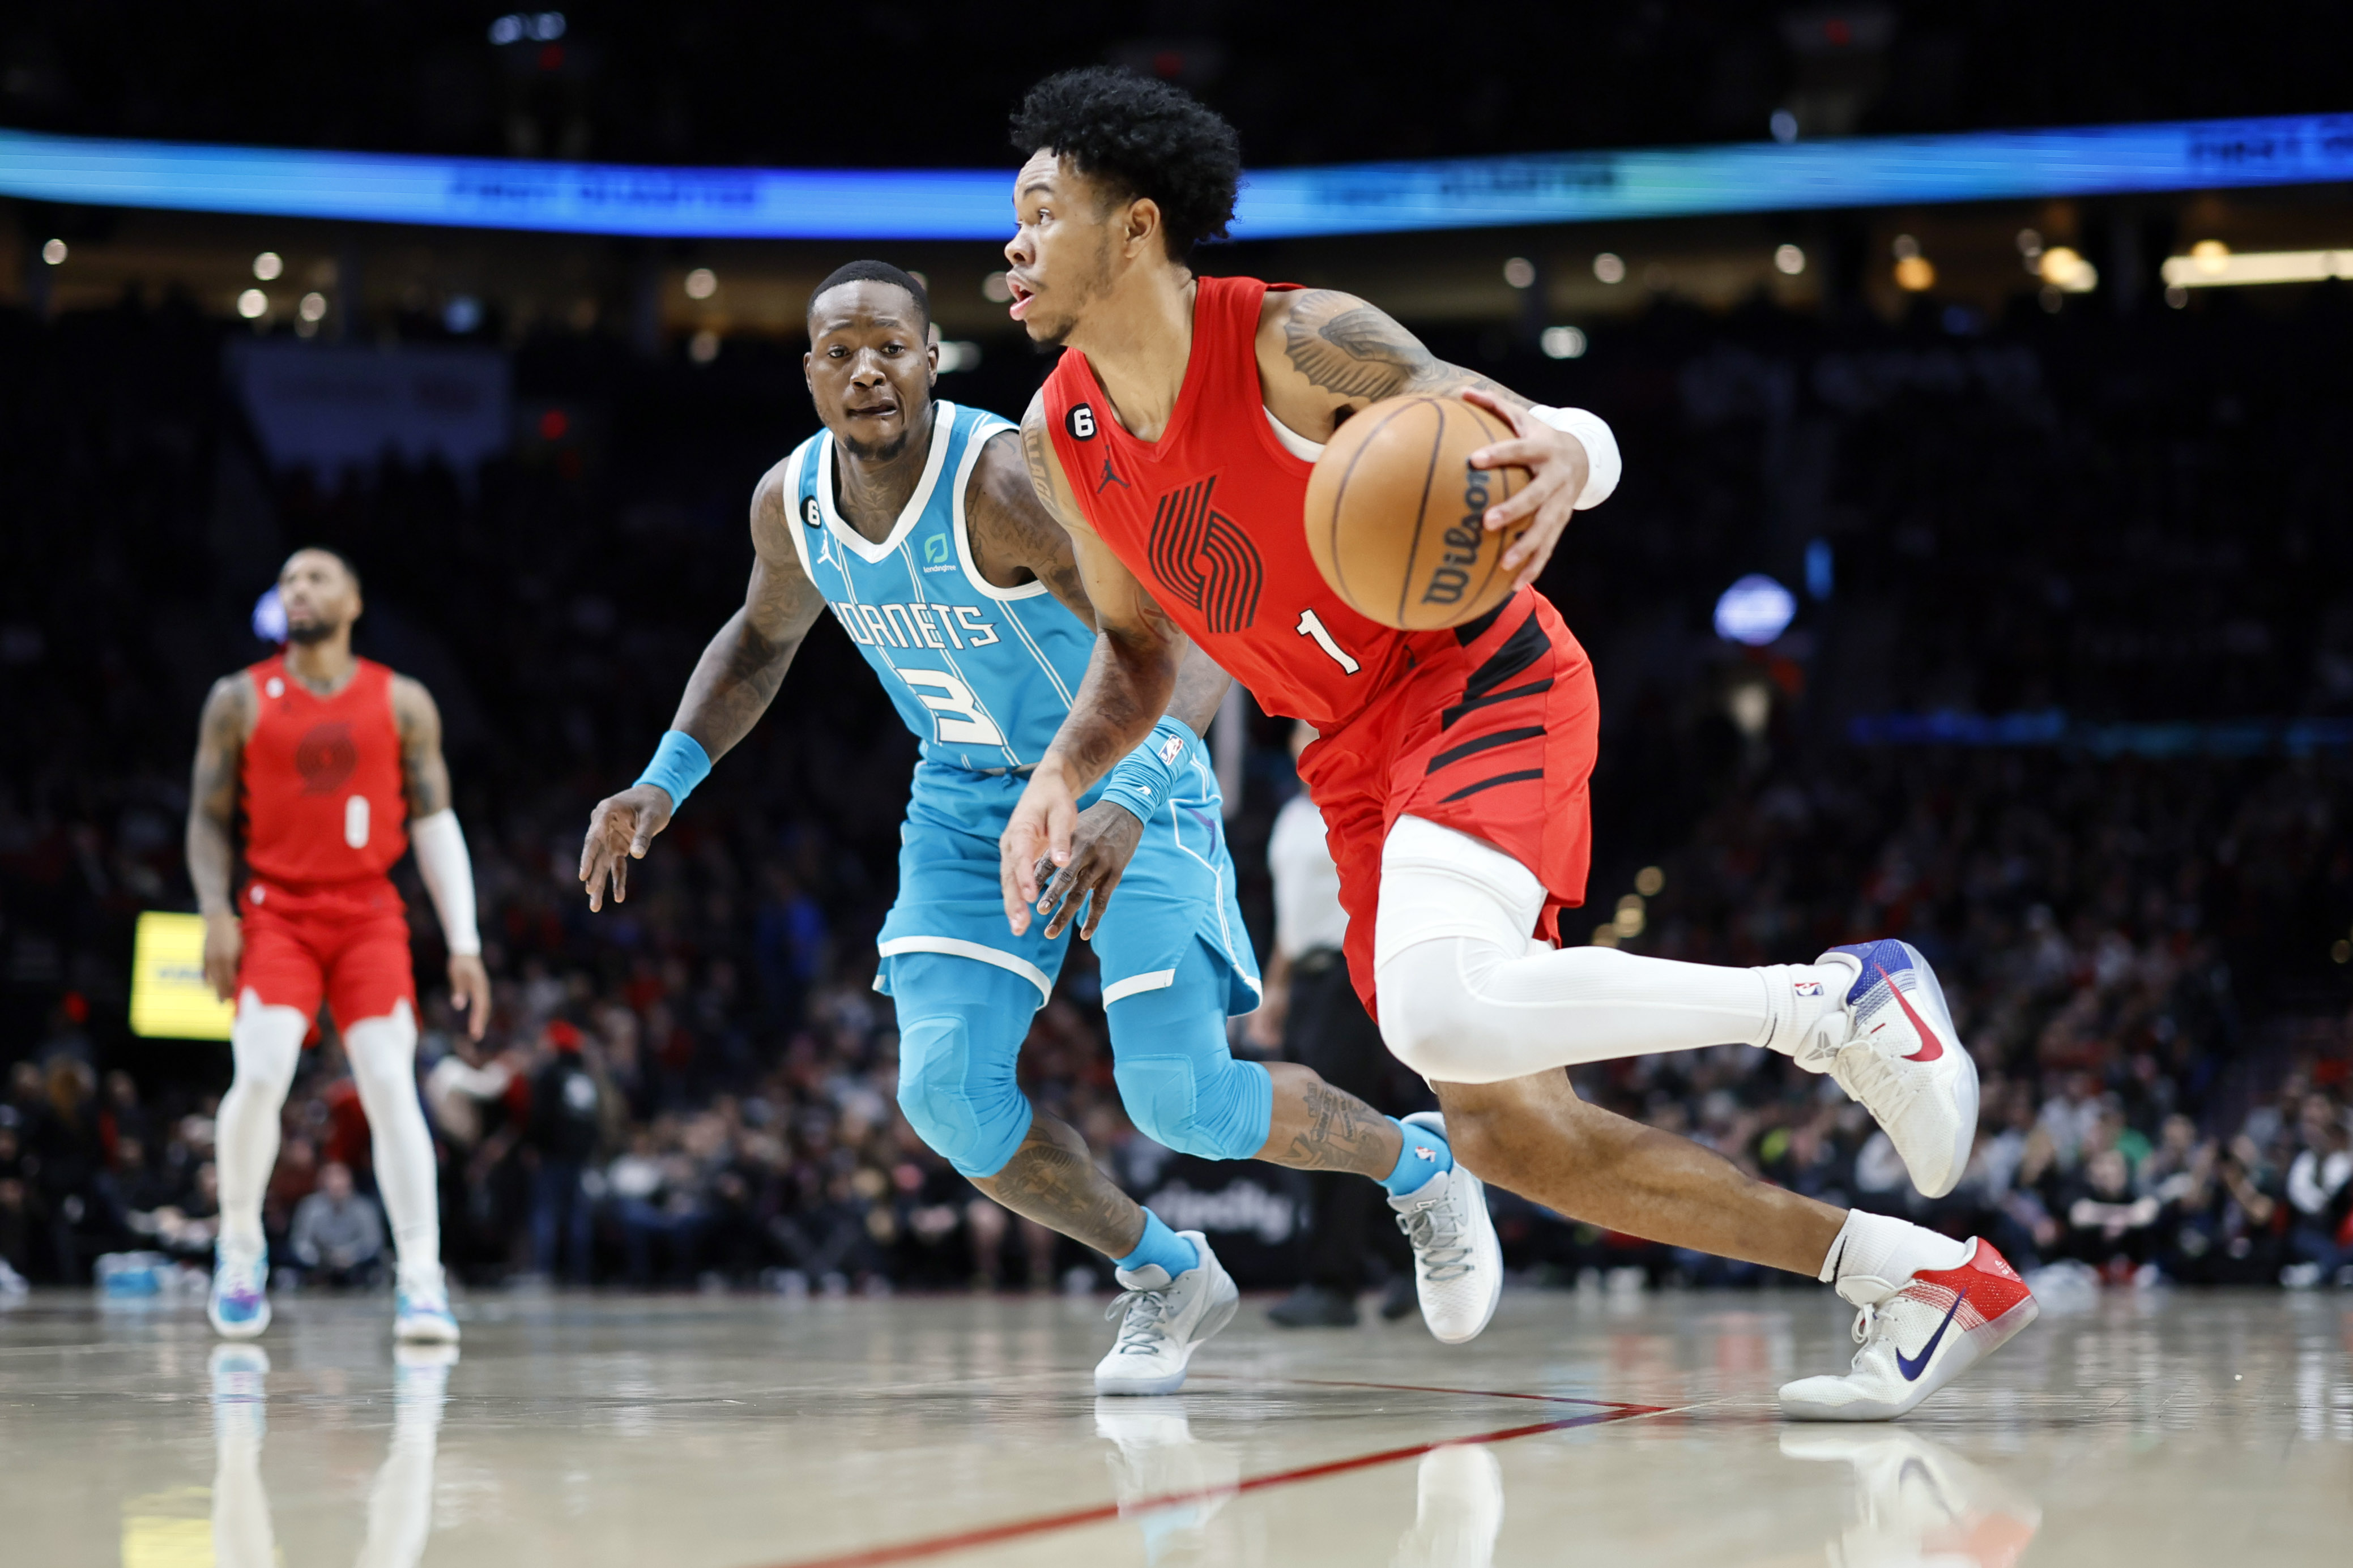 Betting Trends Of The Day For Wednesday, Jan. 4